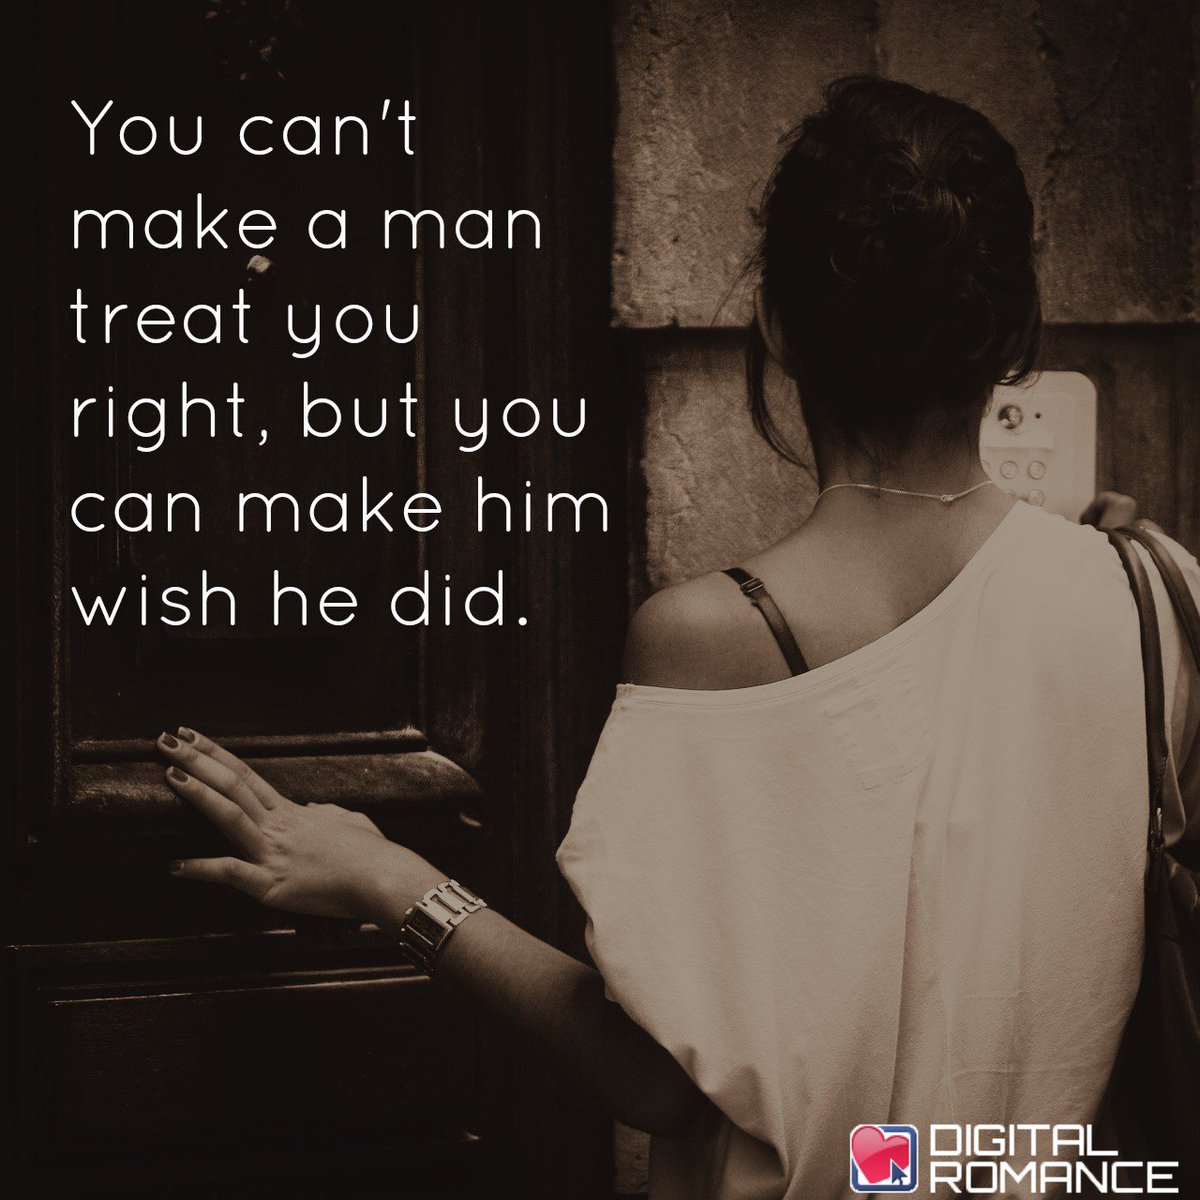 Digital Romance Inc on Twitter "You can t make a man treat you right but you can make him wish he did relationships quotes